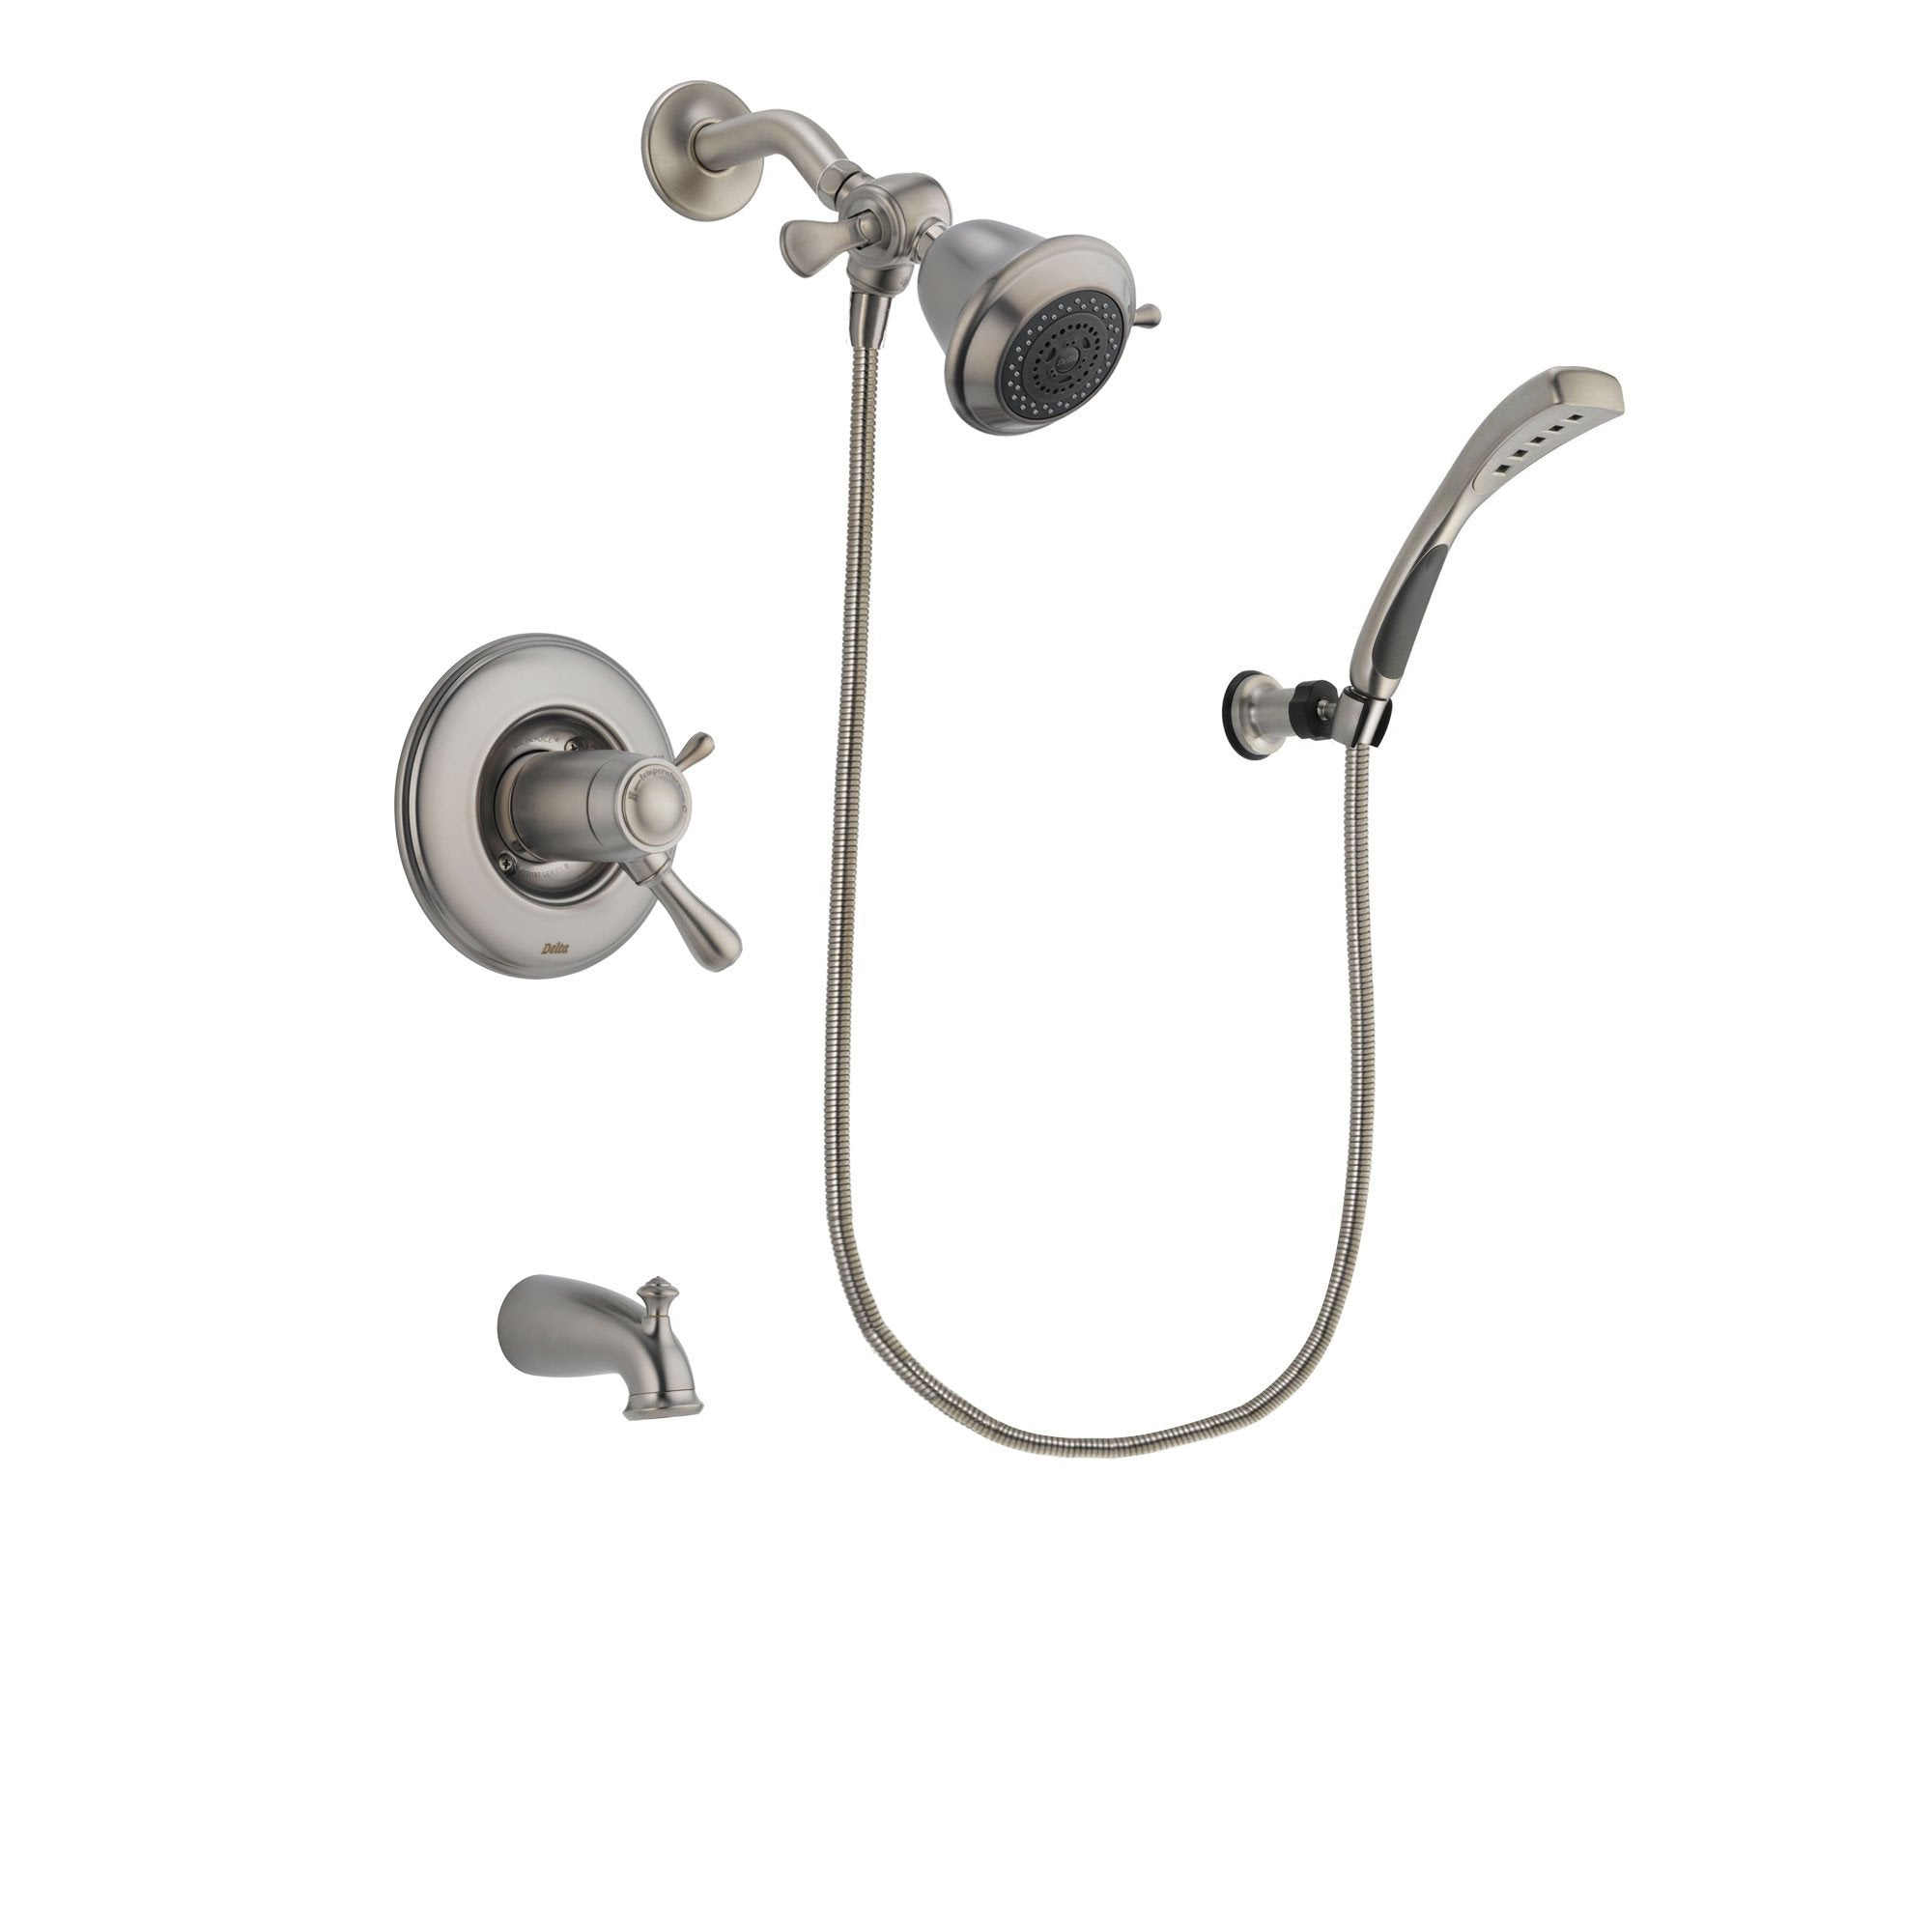 Delta Leland Stainless Steel Finish Thermostatic Tub and Shower Faucet System Package with Shower Head and Wall Mounted Handshower Includes Rough-in Valve and Tub Spout DSP1789V